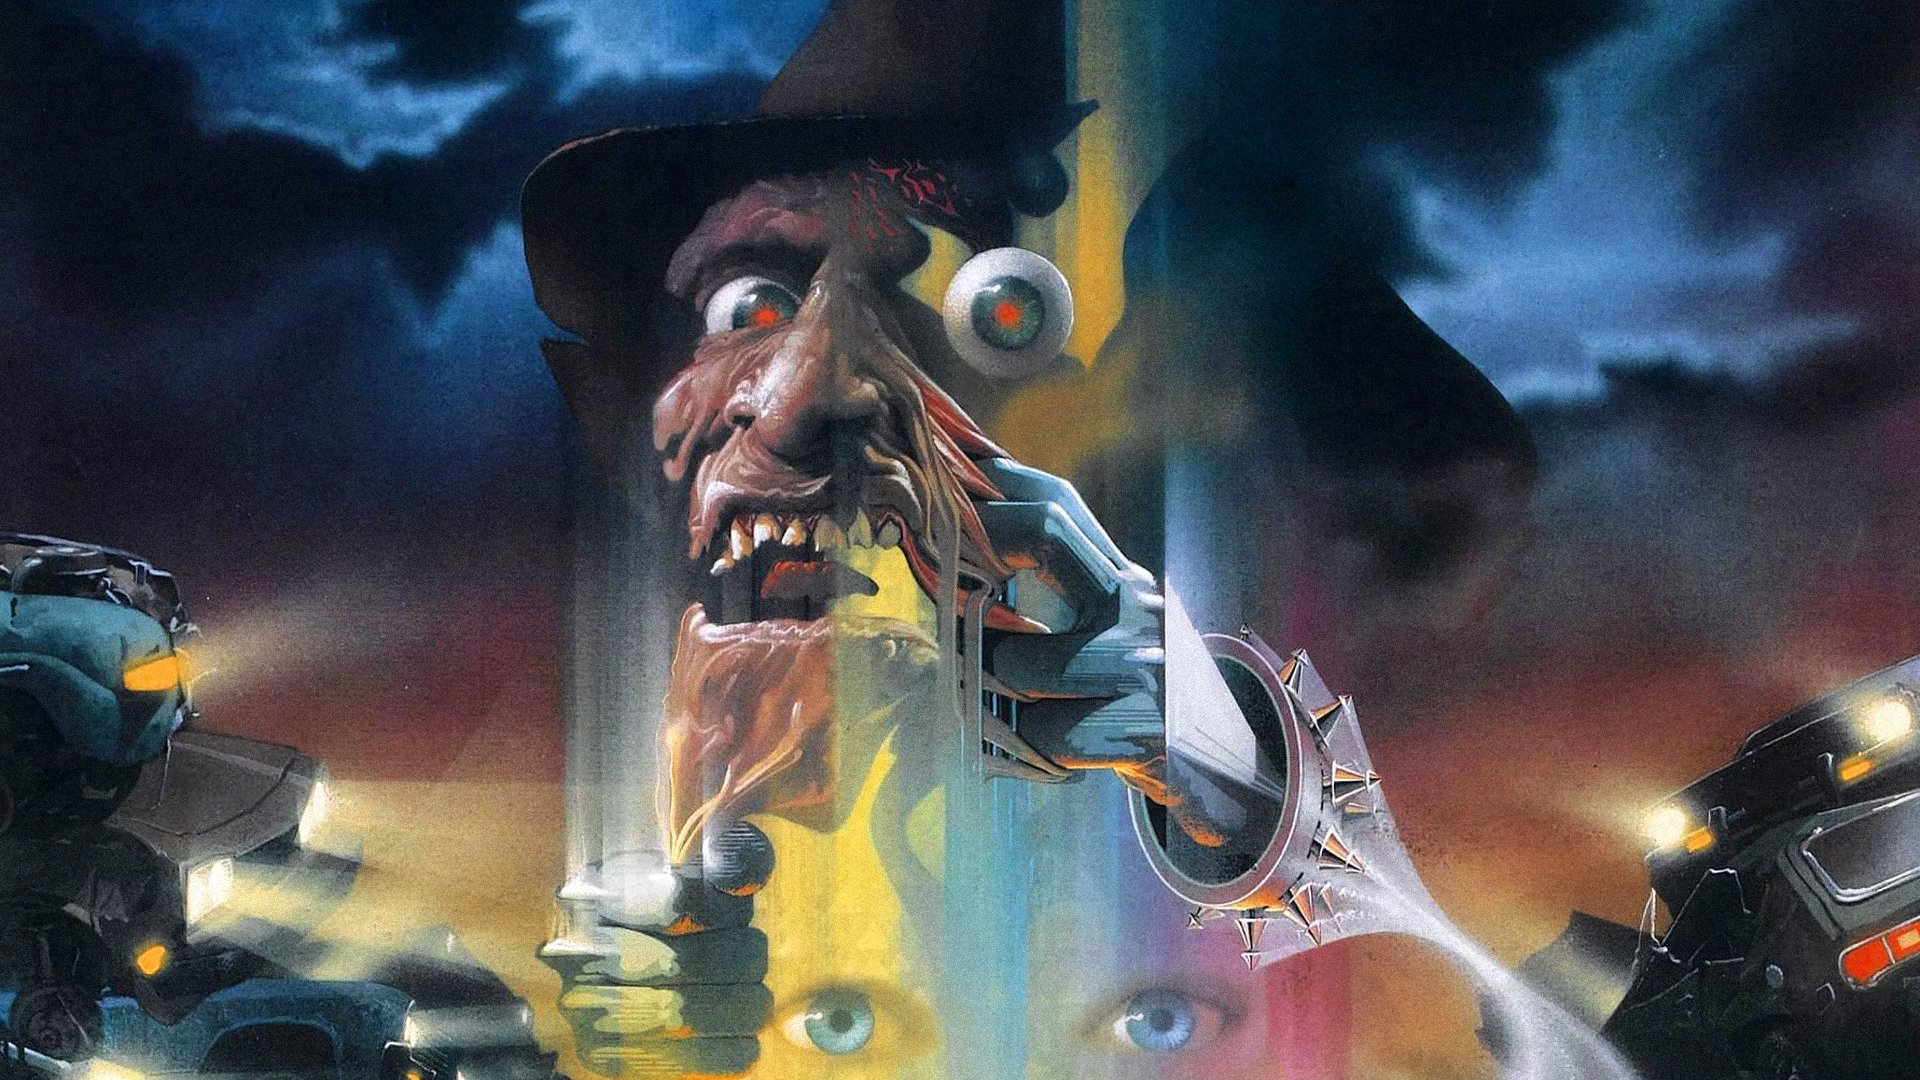 Download mobile wallpaper A Nightmare On Elm Street 4: The Dream Master, A Nightmare On Elm Street, Movie for free.